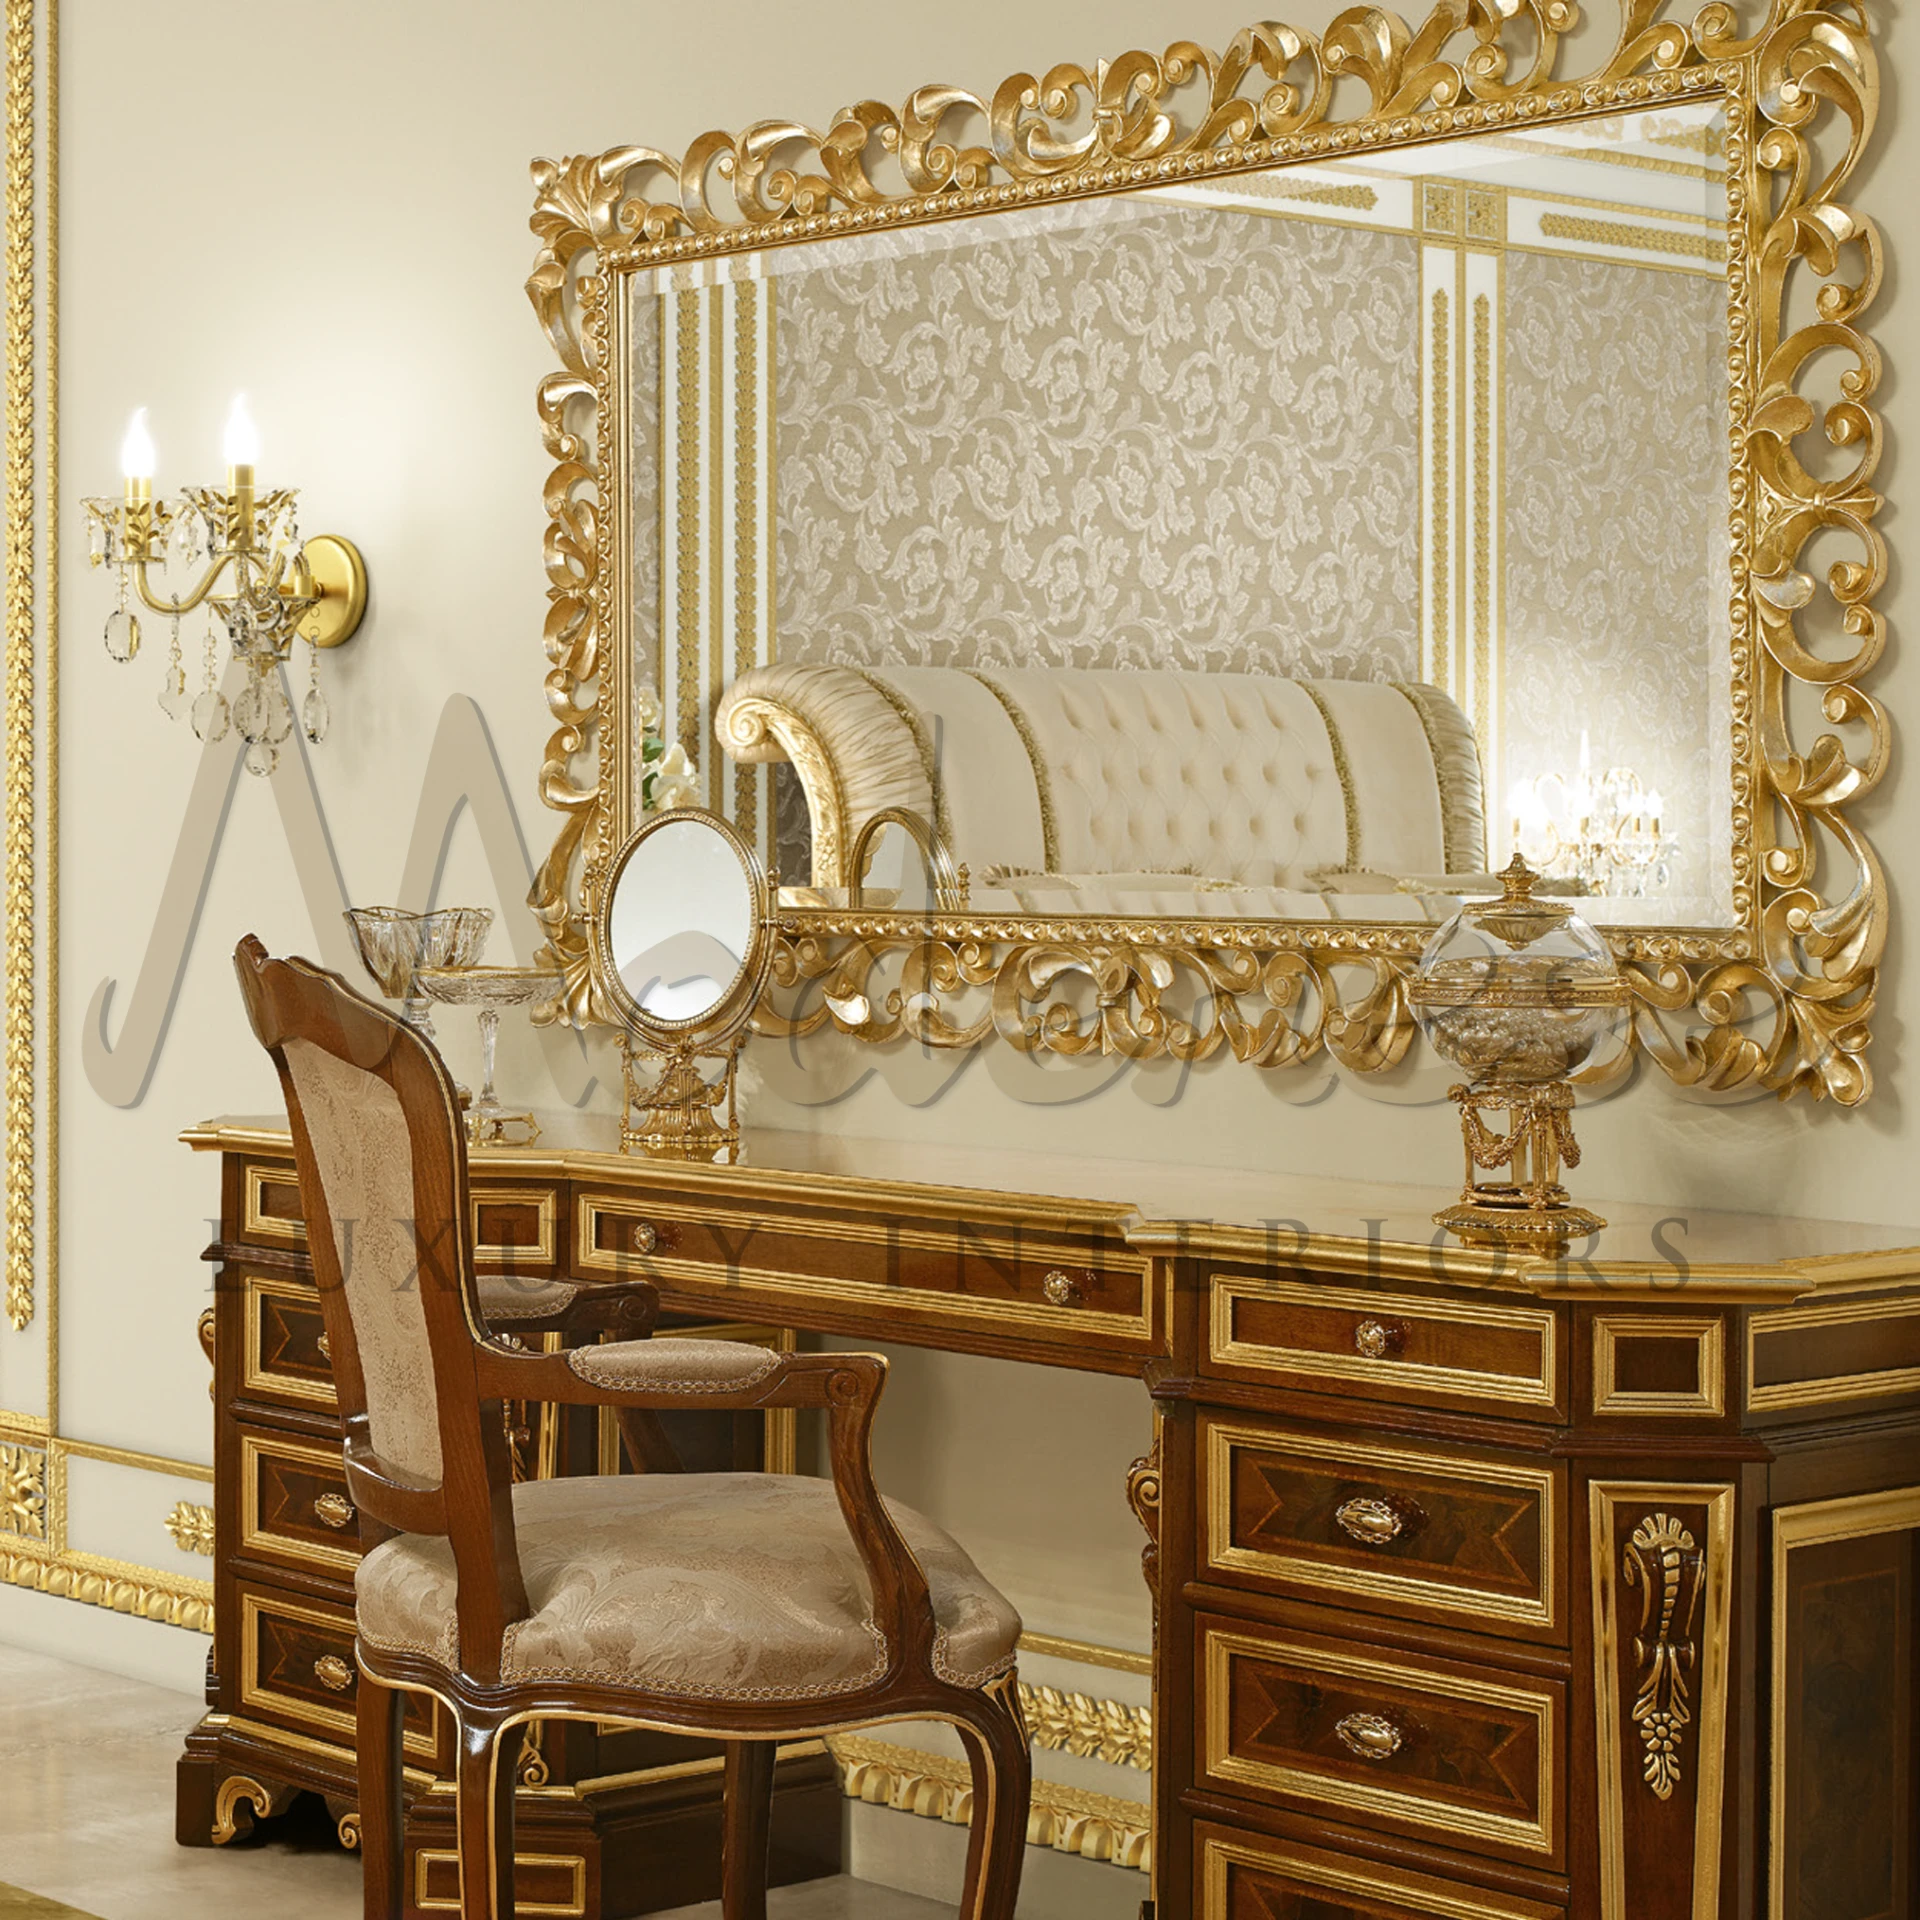 Luxurious Imperial Mirror with intricate carvings and filigree in a classic design, embodying opulence and handmade craftsmanship in home decor.





